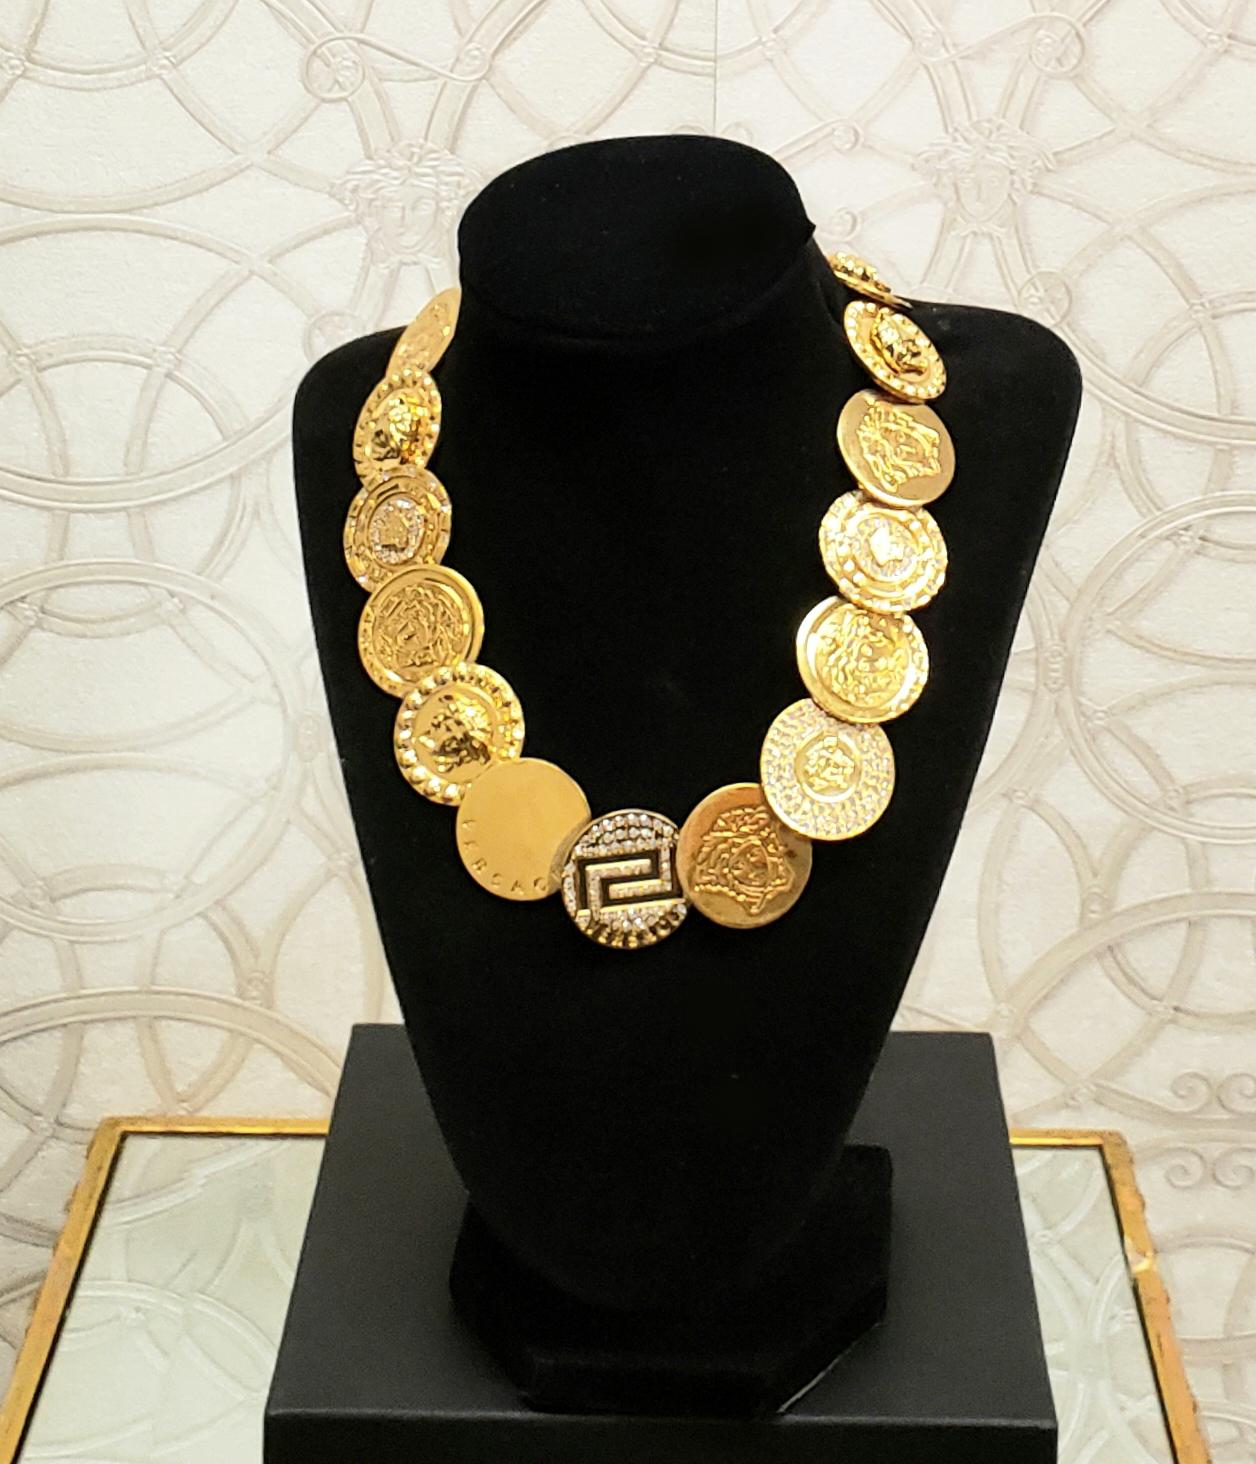 VERSACE


      24K Gold Plated Medusa Necklace with Swarovski Crystals 


Made in Italy



Total Length 18